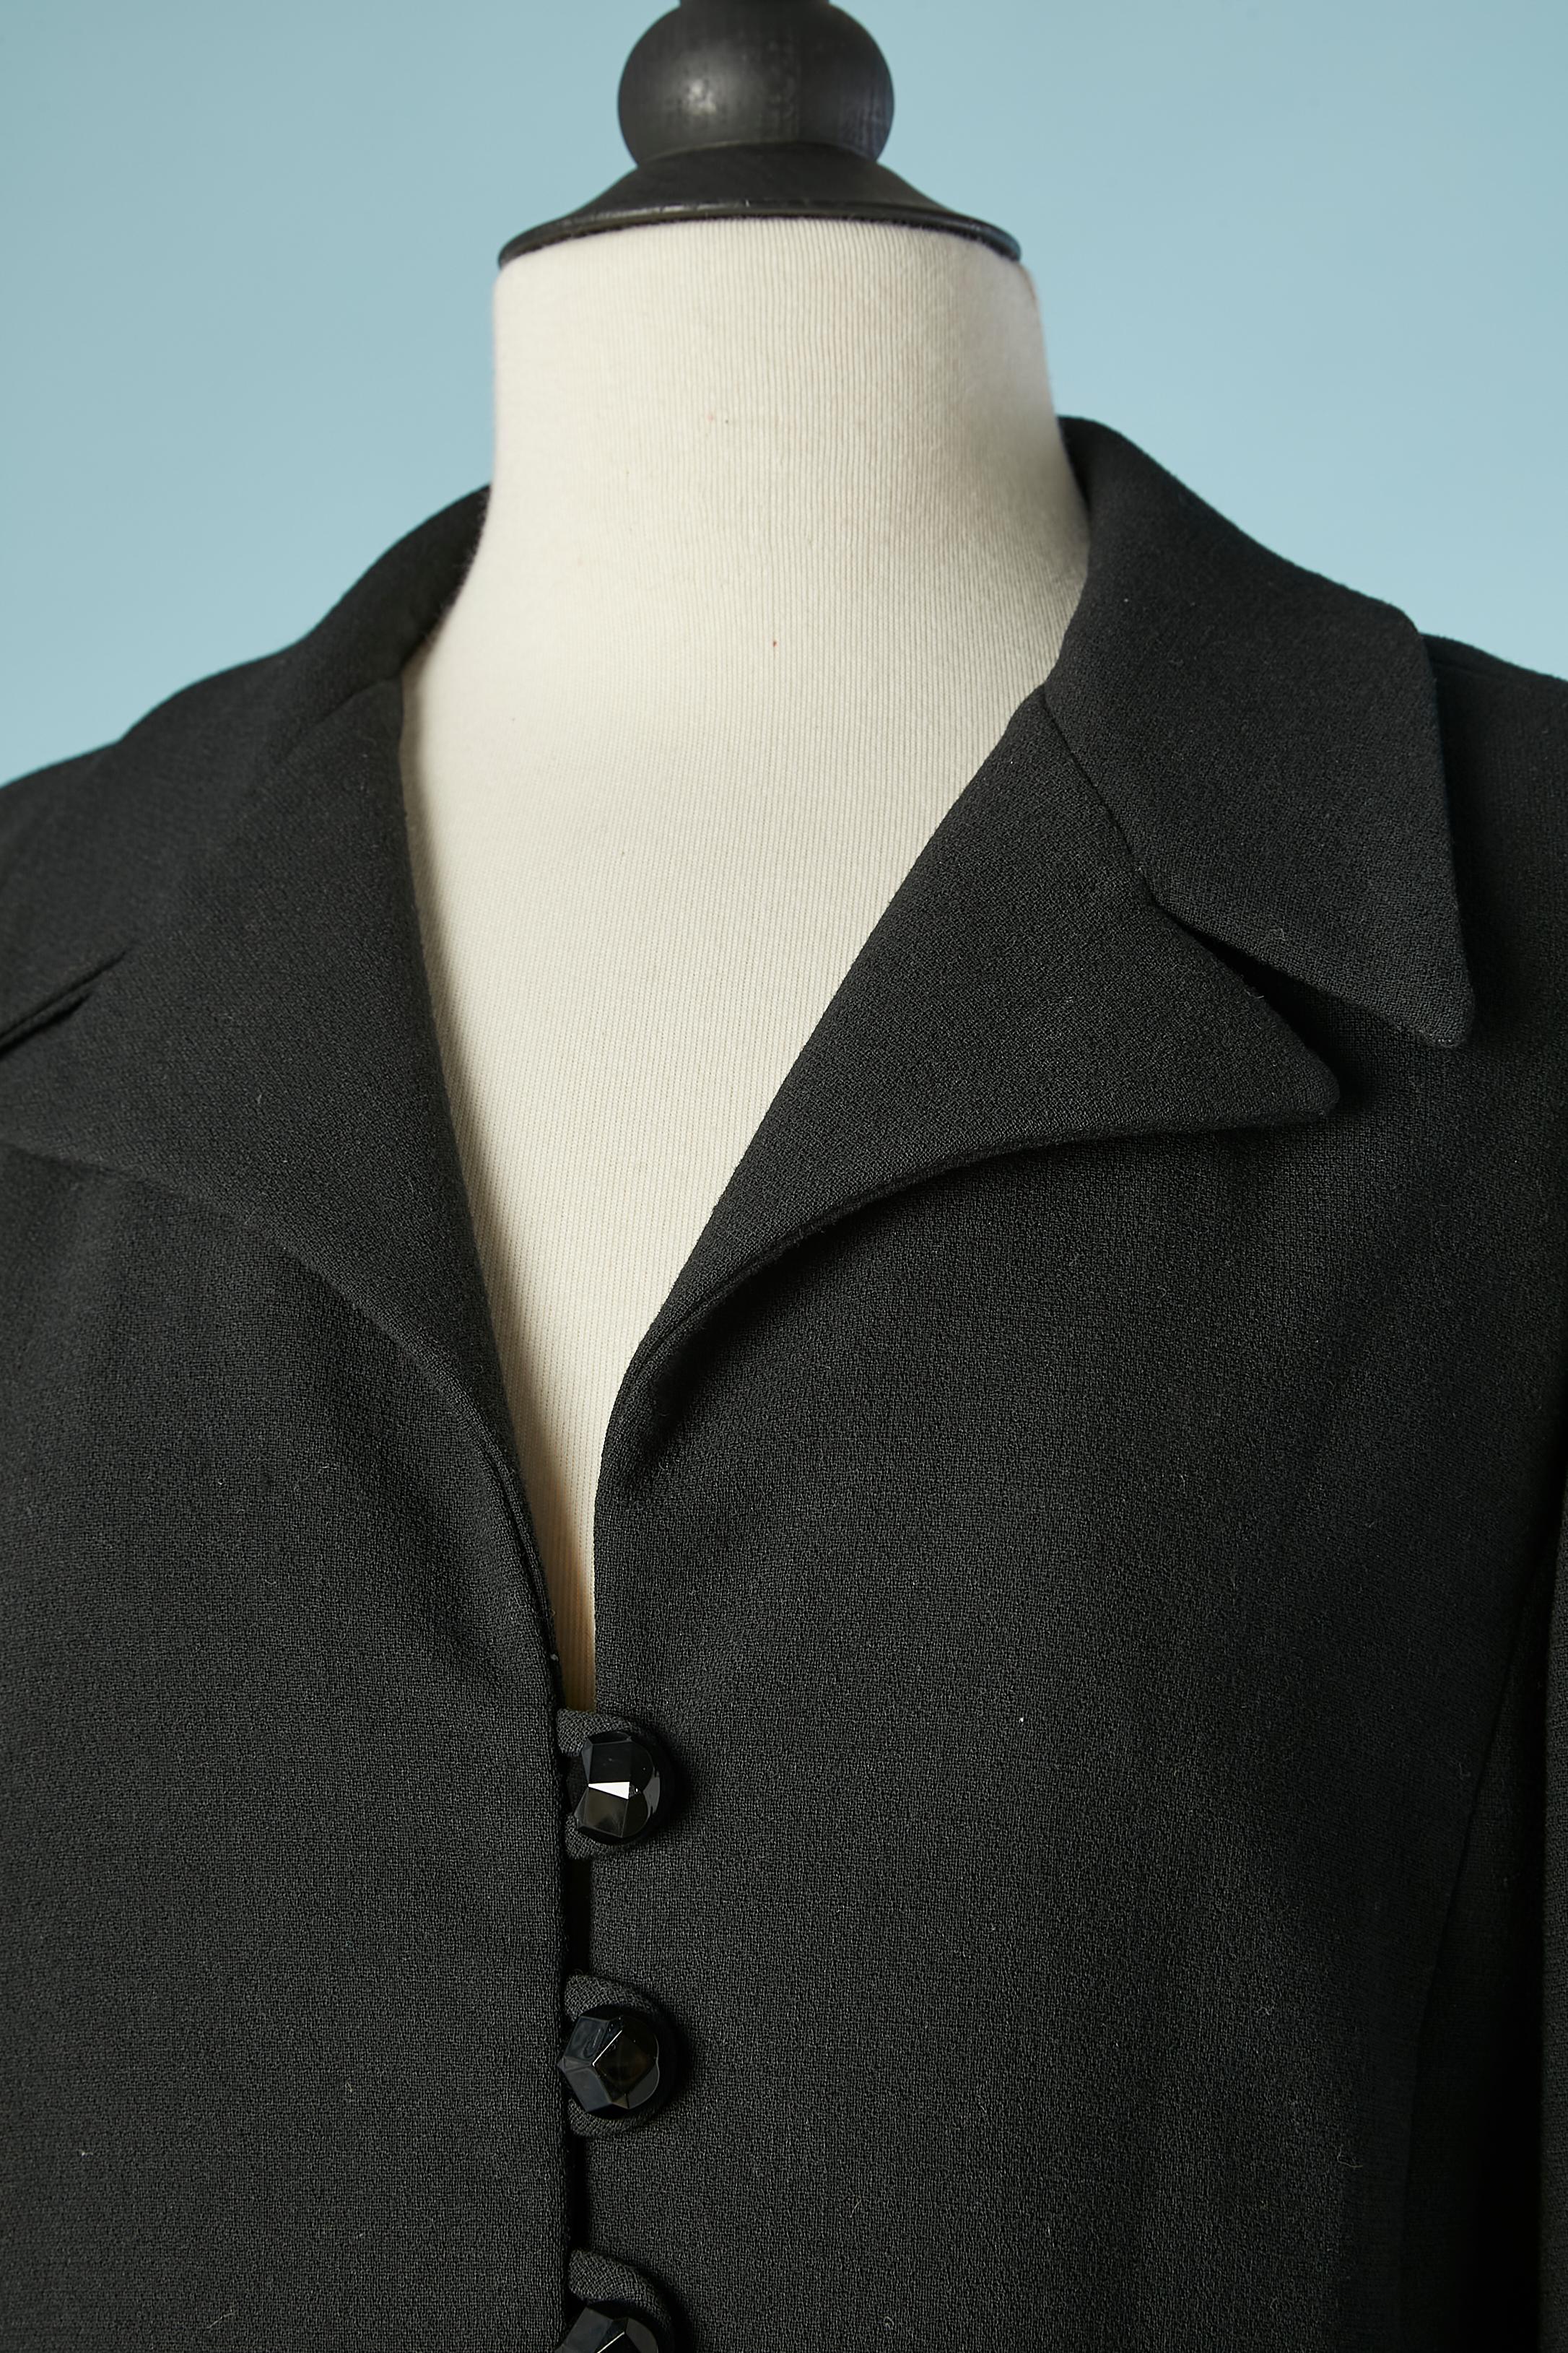 Black wool crepe skit-suit with black buttons .Rayon lining.  Fake pockets. 
SIZE M